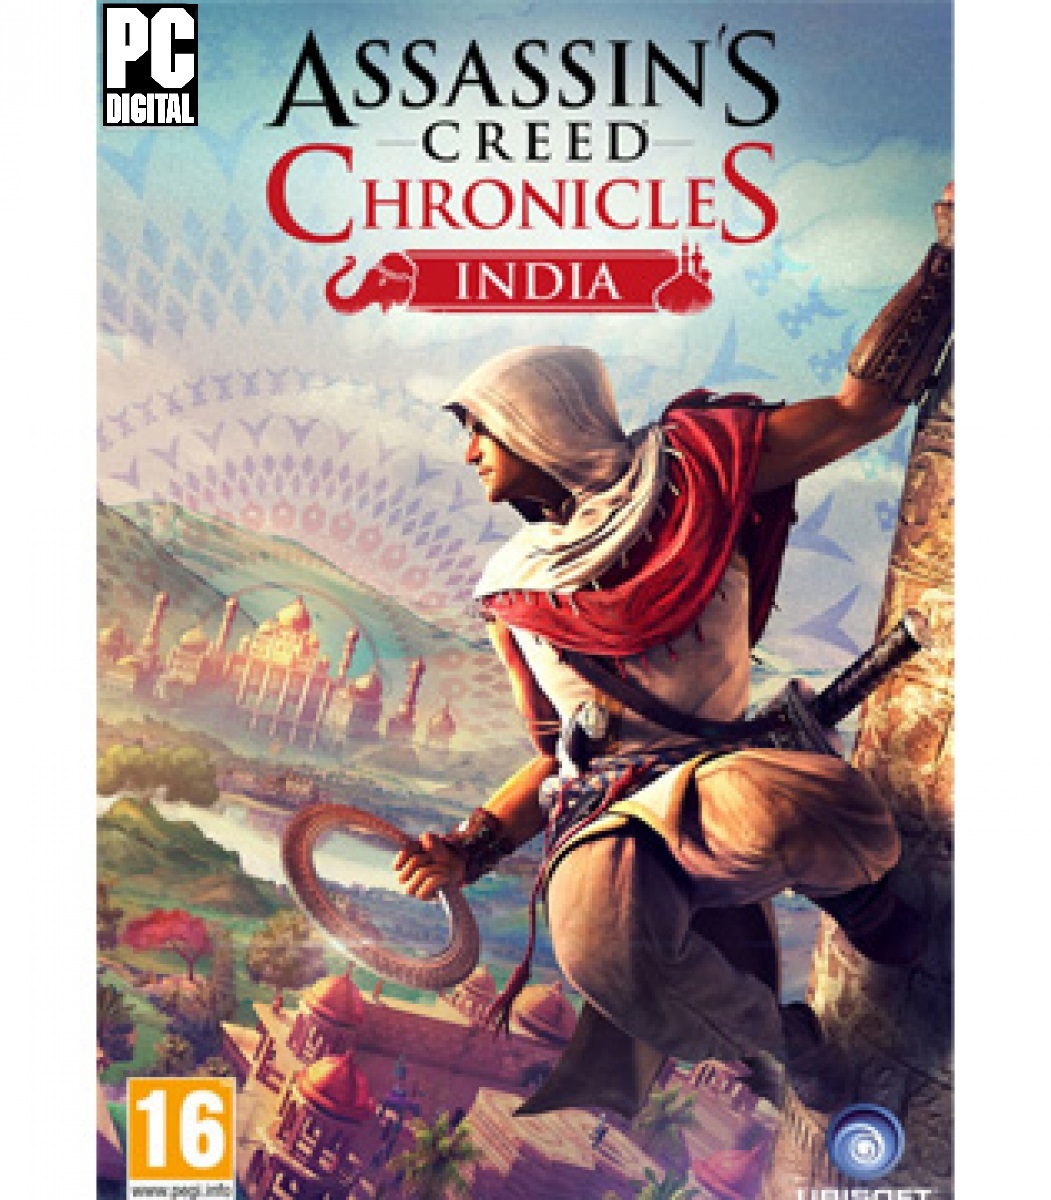 Assassin’s Creed® Chronicles: India PC (Digital)